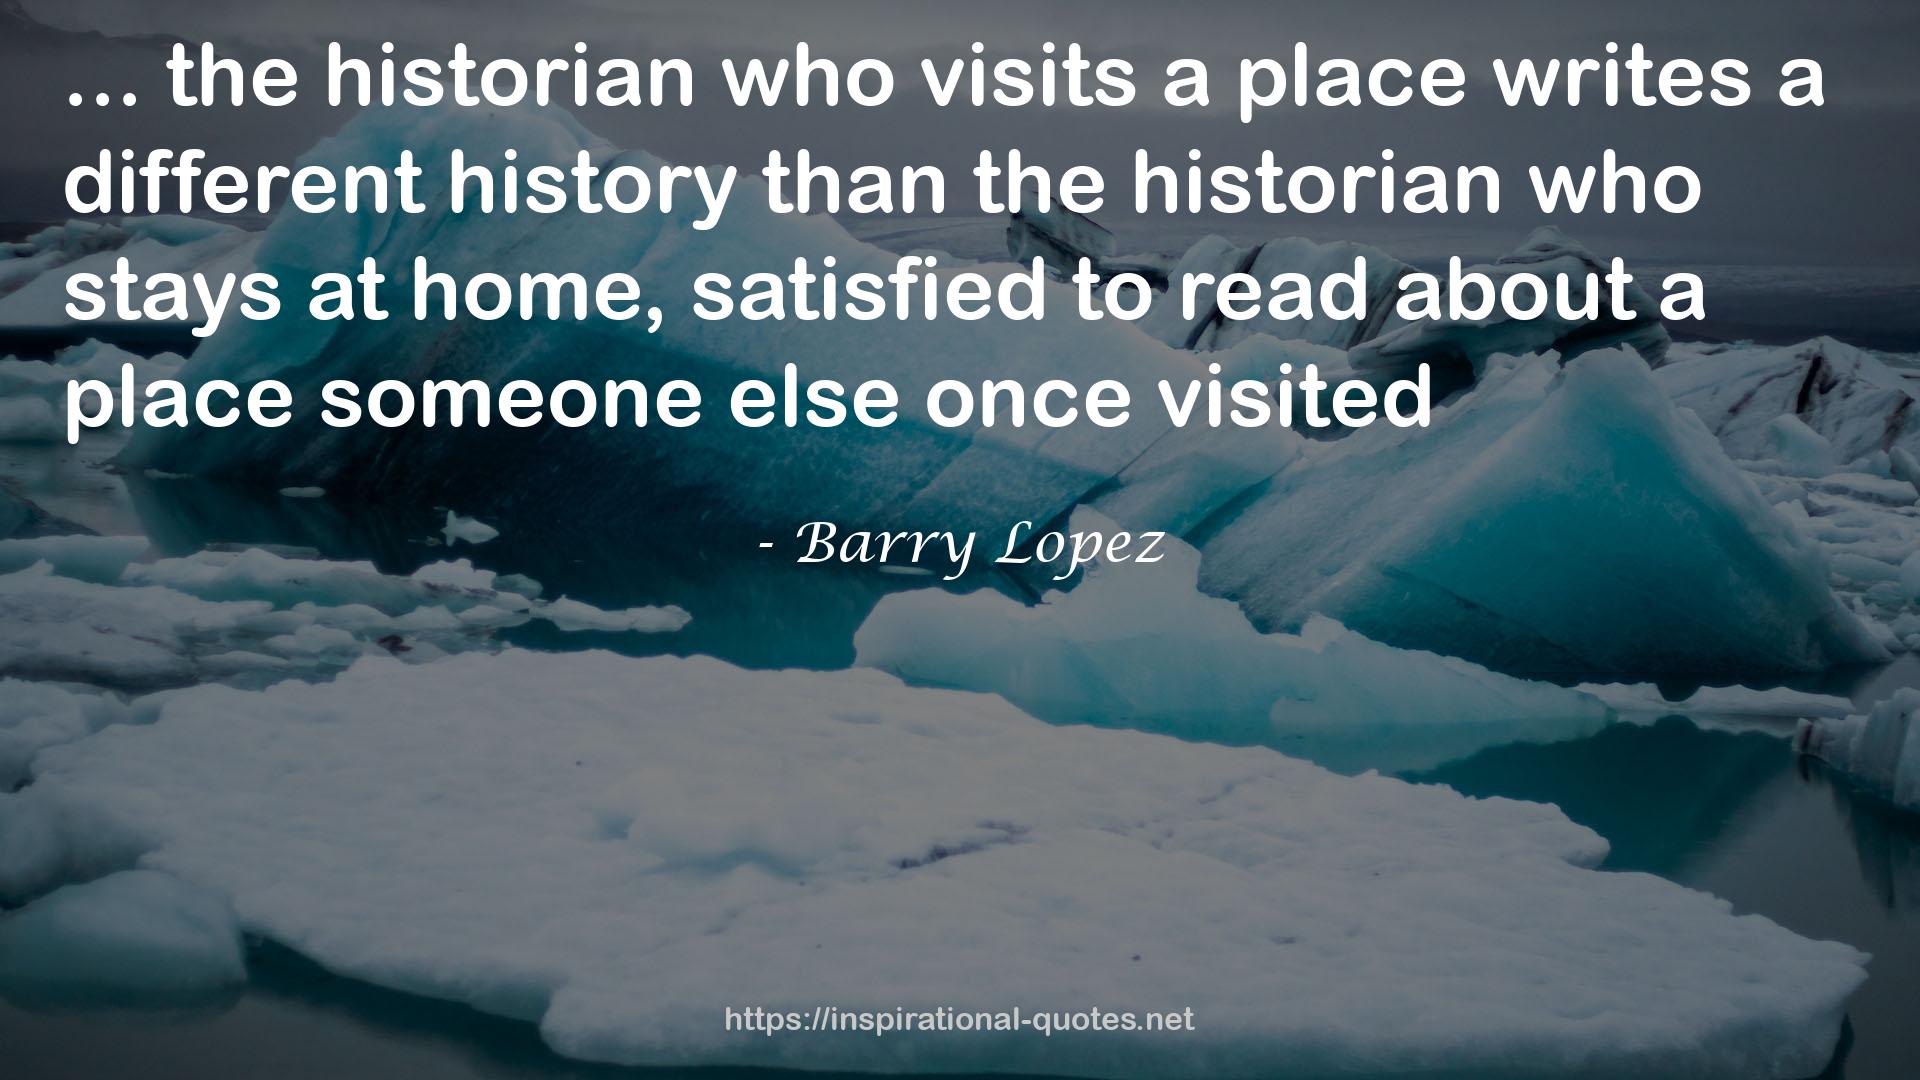 Barry Lopez QUOTES